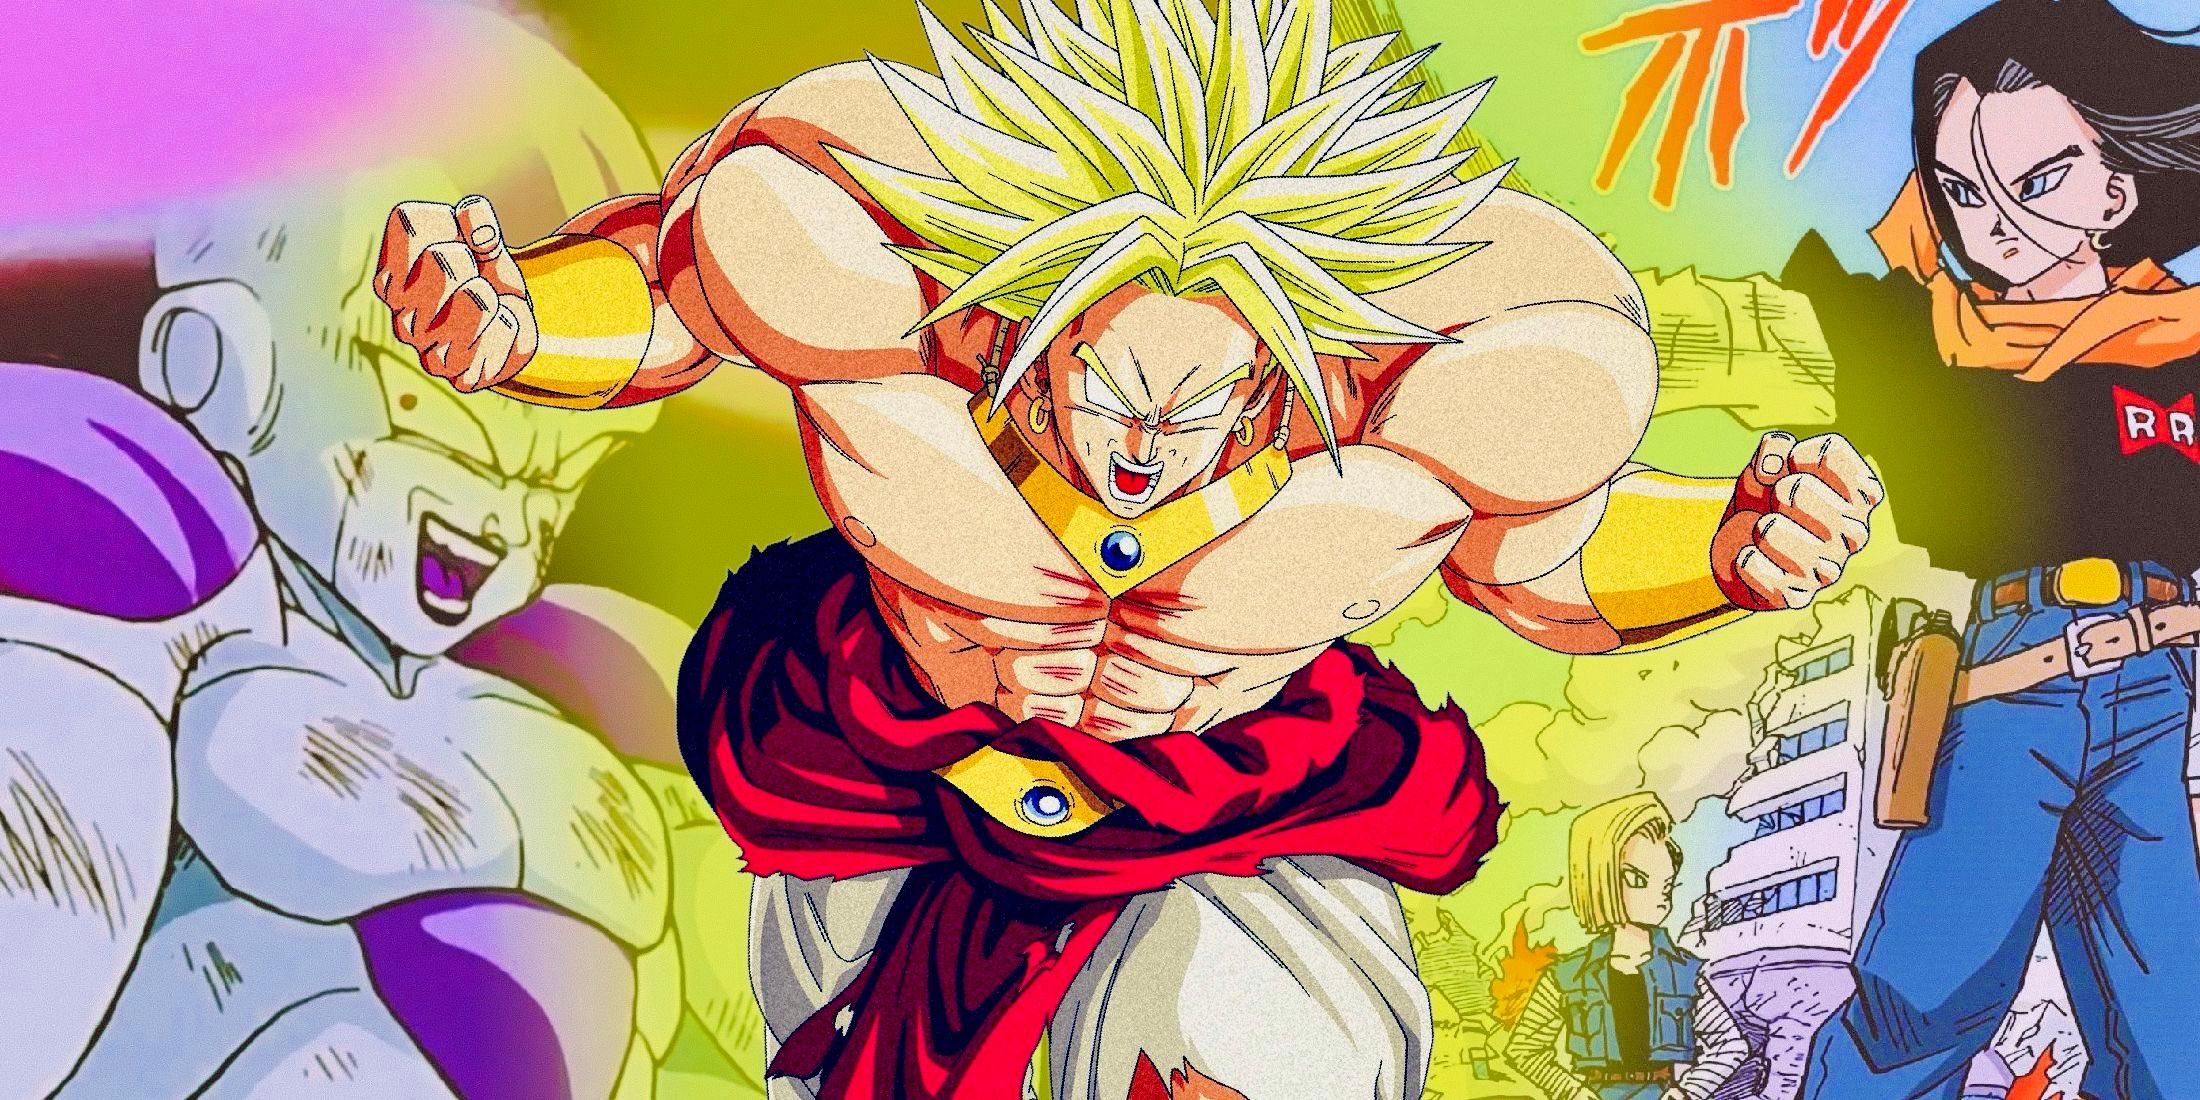 Broly SSj in Dragon Ball Z with Frieza and Androids 17 & 18